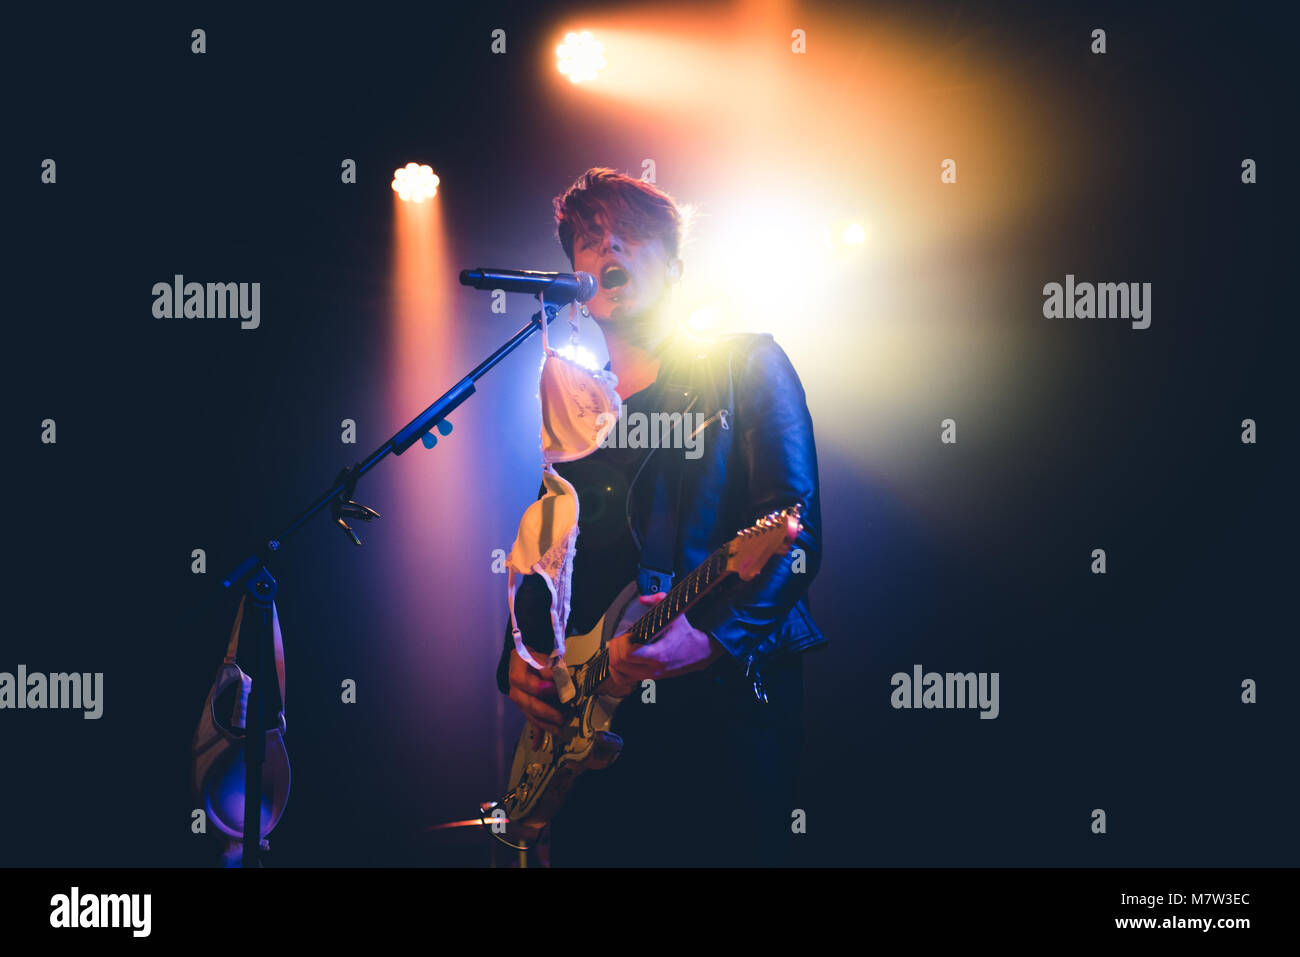 Turin, Italy, 2018 march 12th: The Italian pop band The Colors performing live on stage at the Hiroshima Mon Amour club for their 'Frida Tour' 2018 last concert Photo: Alessandro Bosio/Alamy Live News Stock Photo